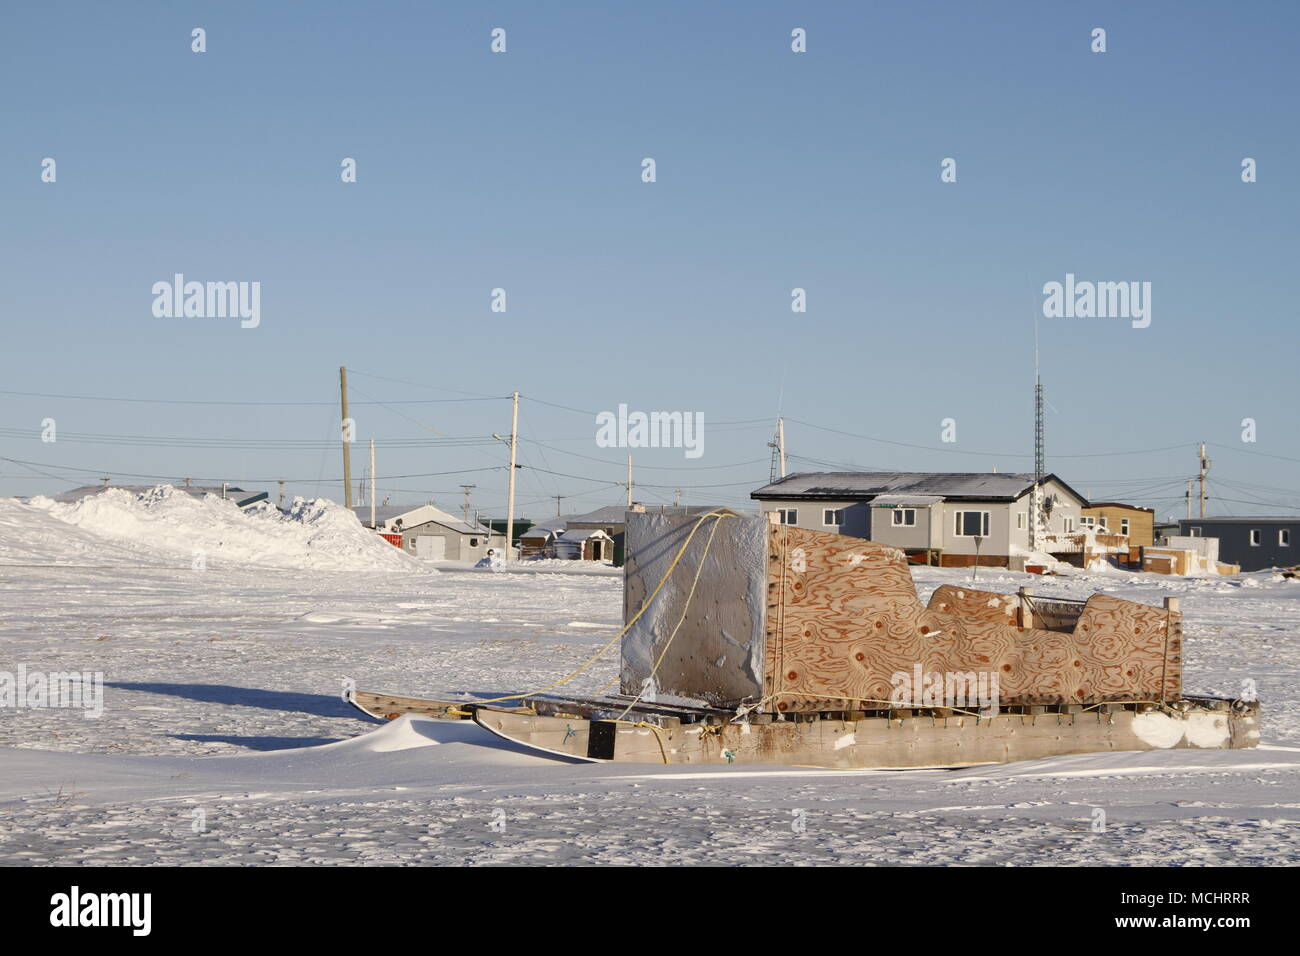 Side view of a traditional Inuit cargo sled or Komatik in the Arviat style in the Kivalliq region, Nunavut Canada Stock Photo